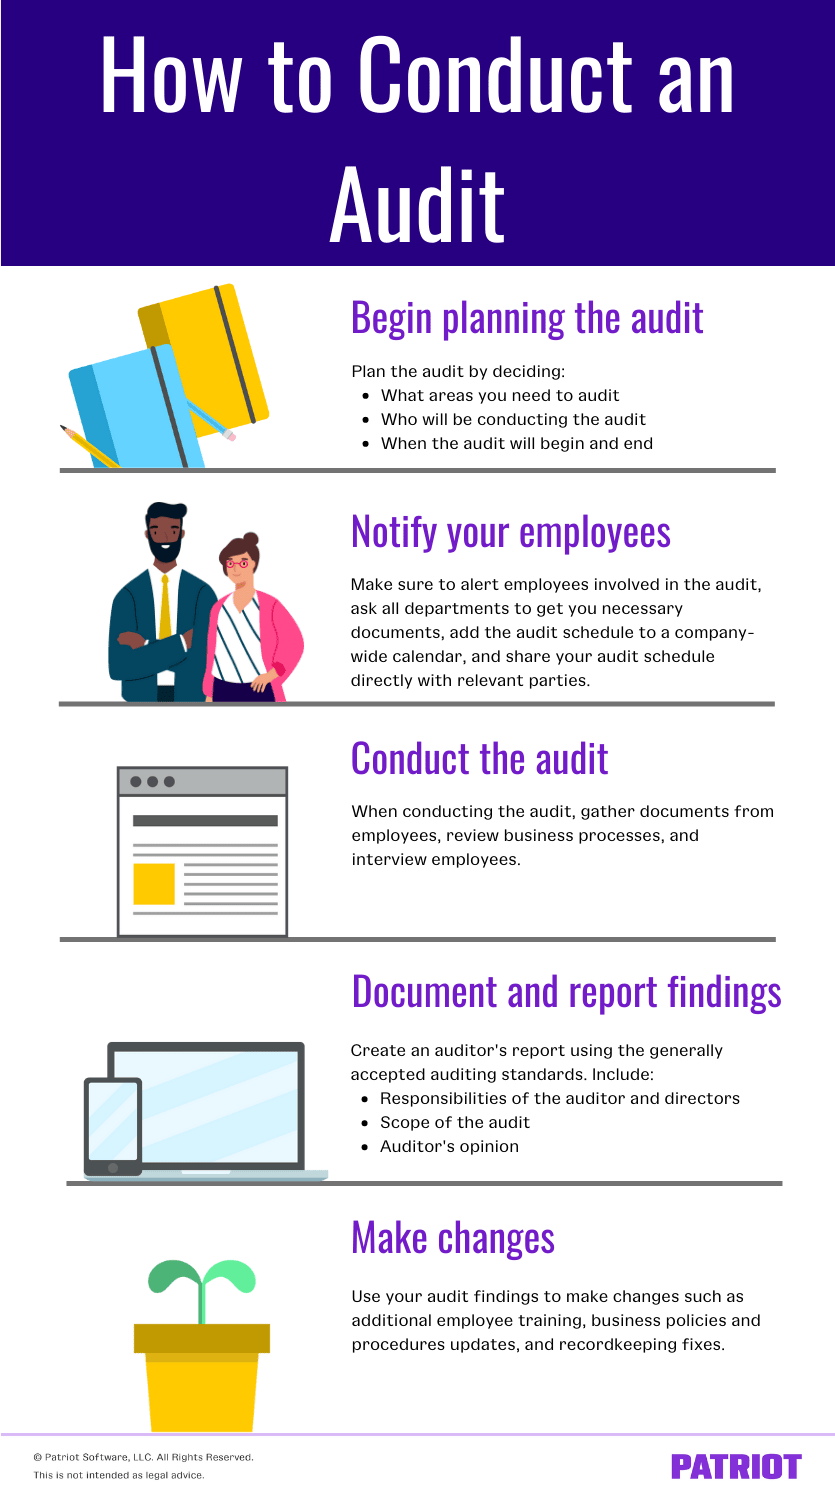 How to Conduct an audit: 5 steps